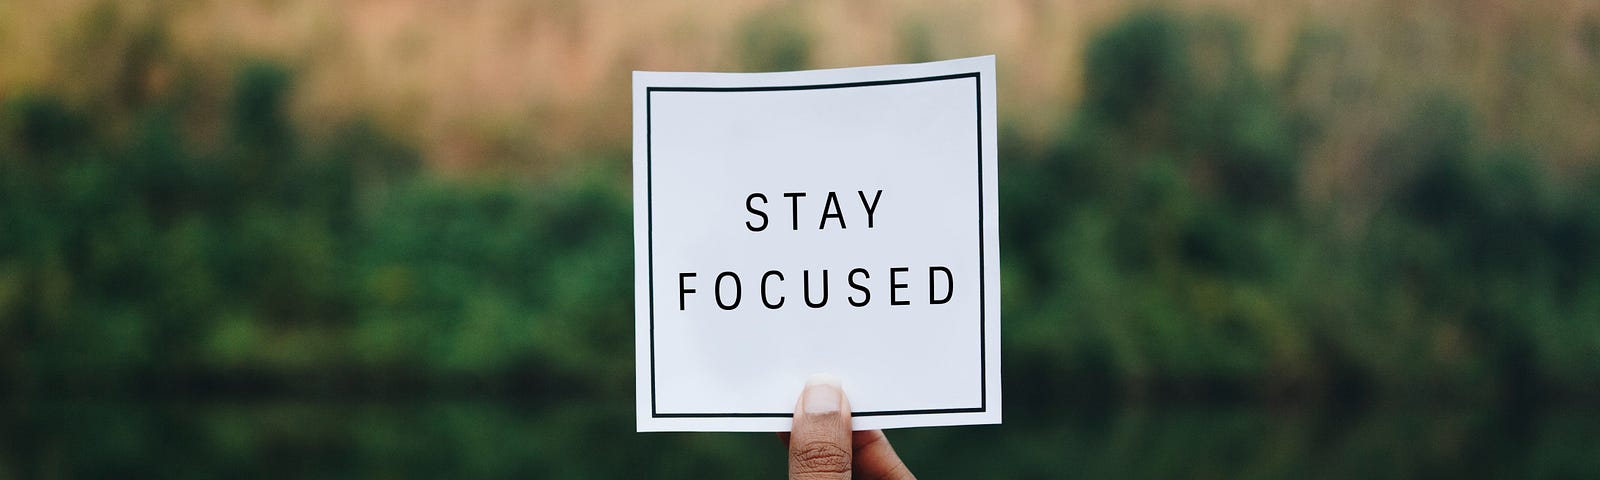 A hand holds a card in front of a lake which reads, “Stay focused.”